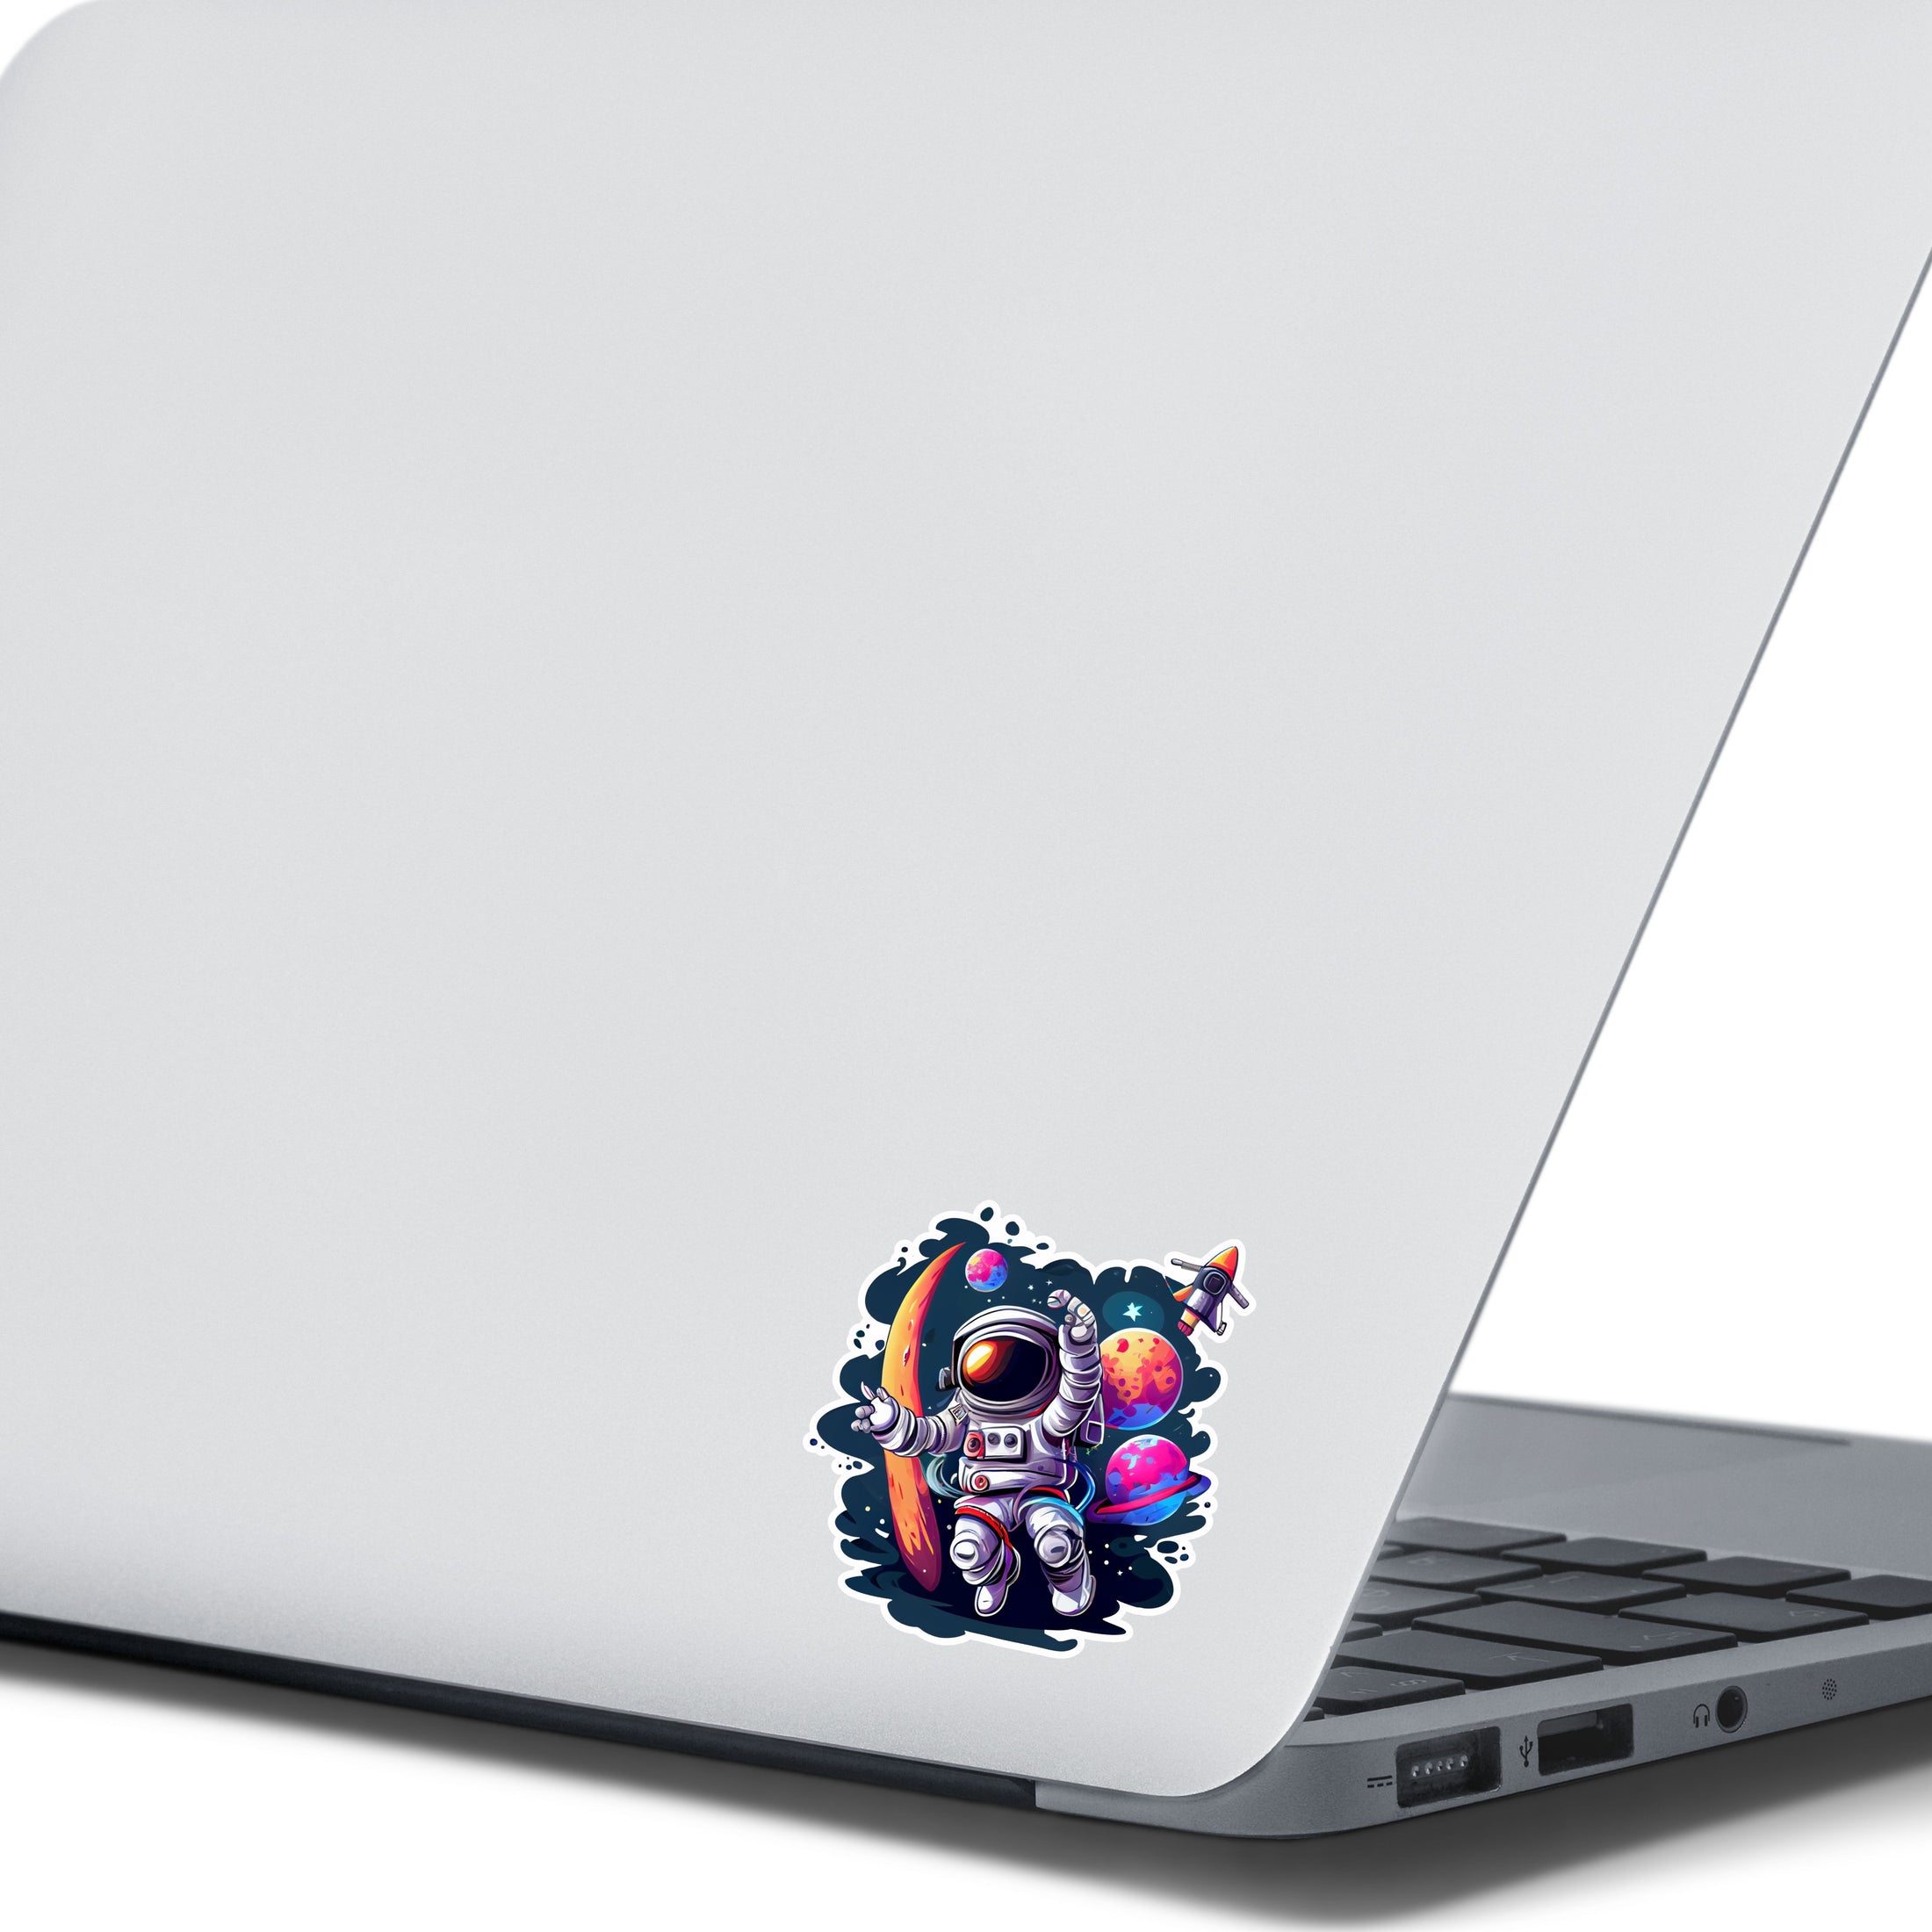 This image shows the astronaut spacewalk sticker on the back of an open laptop.